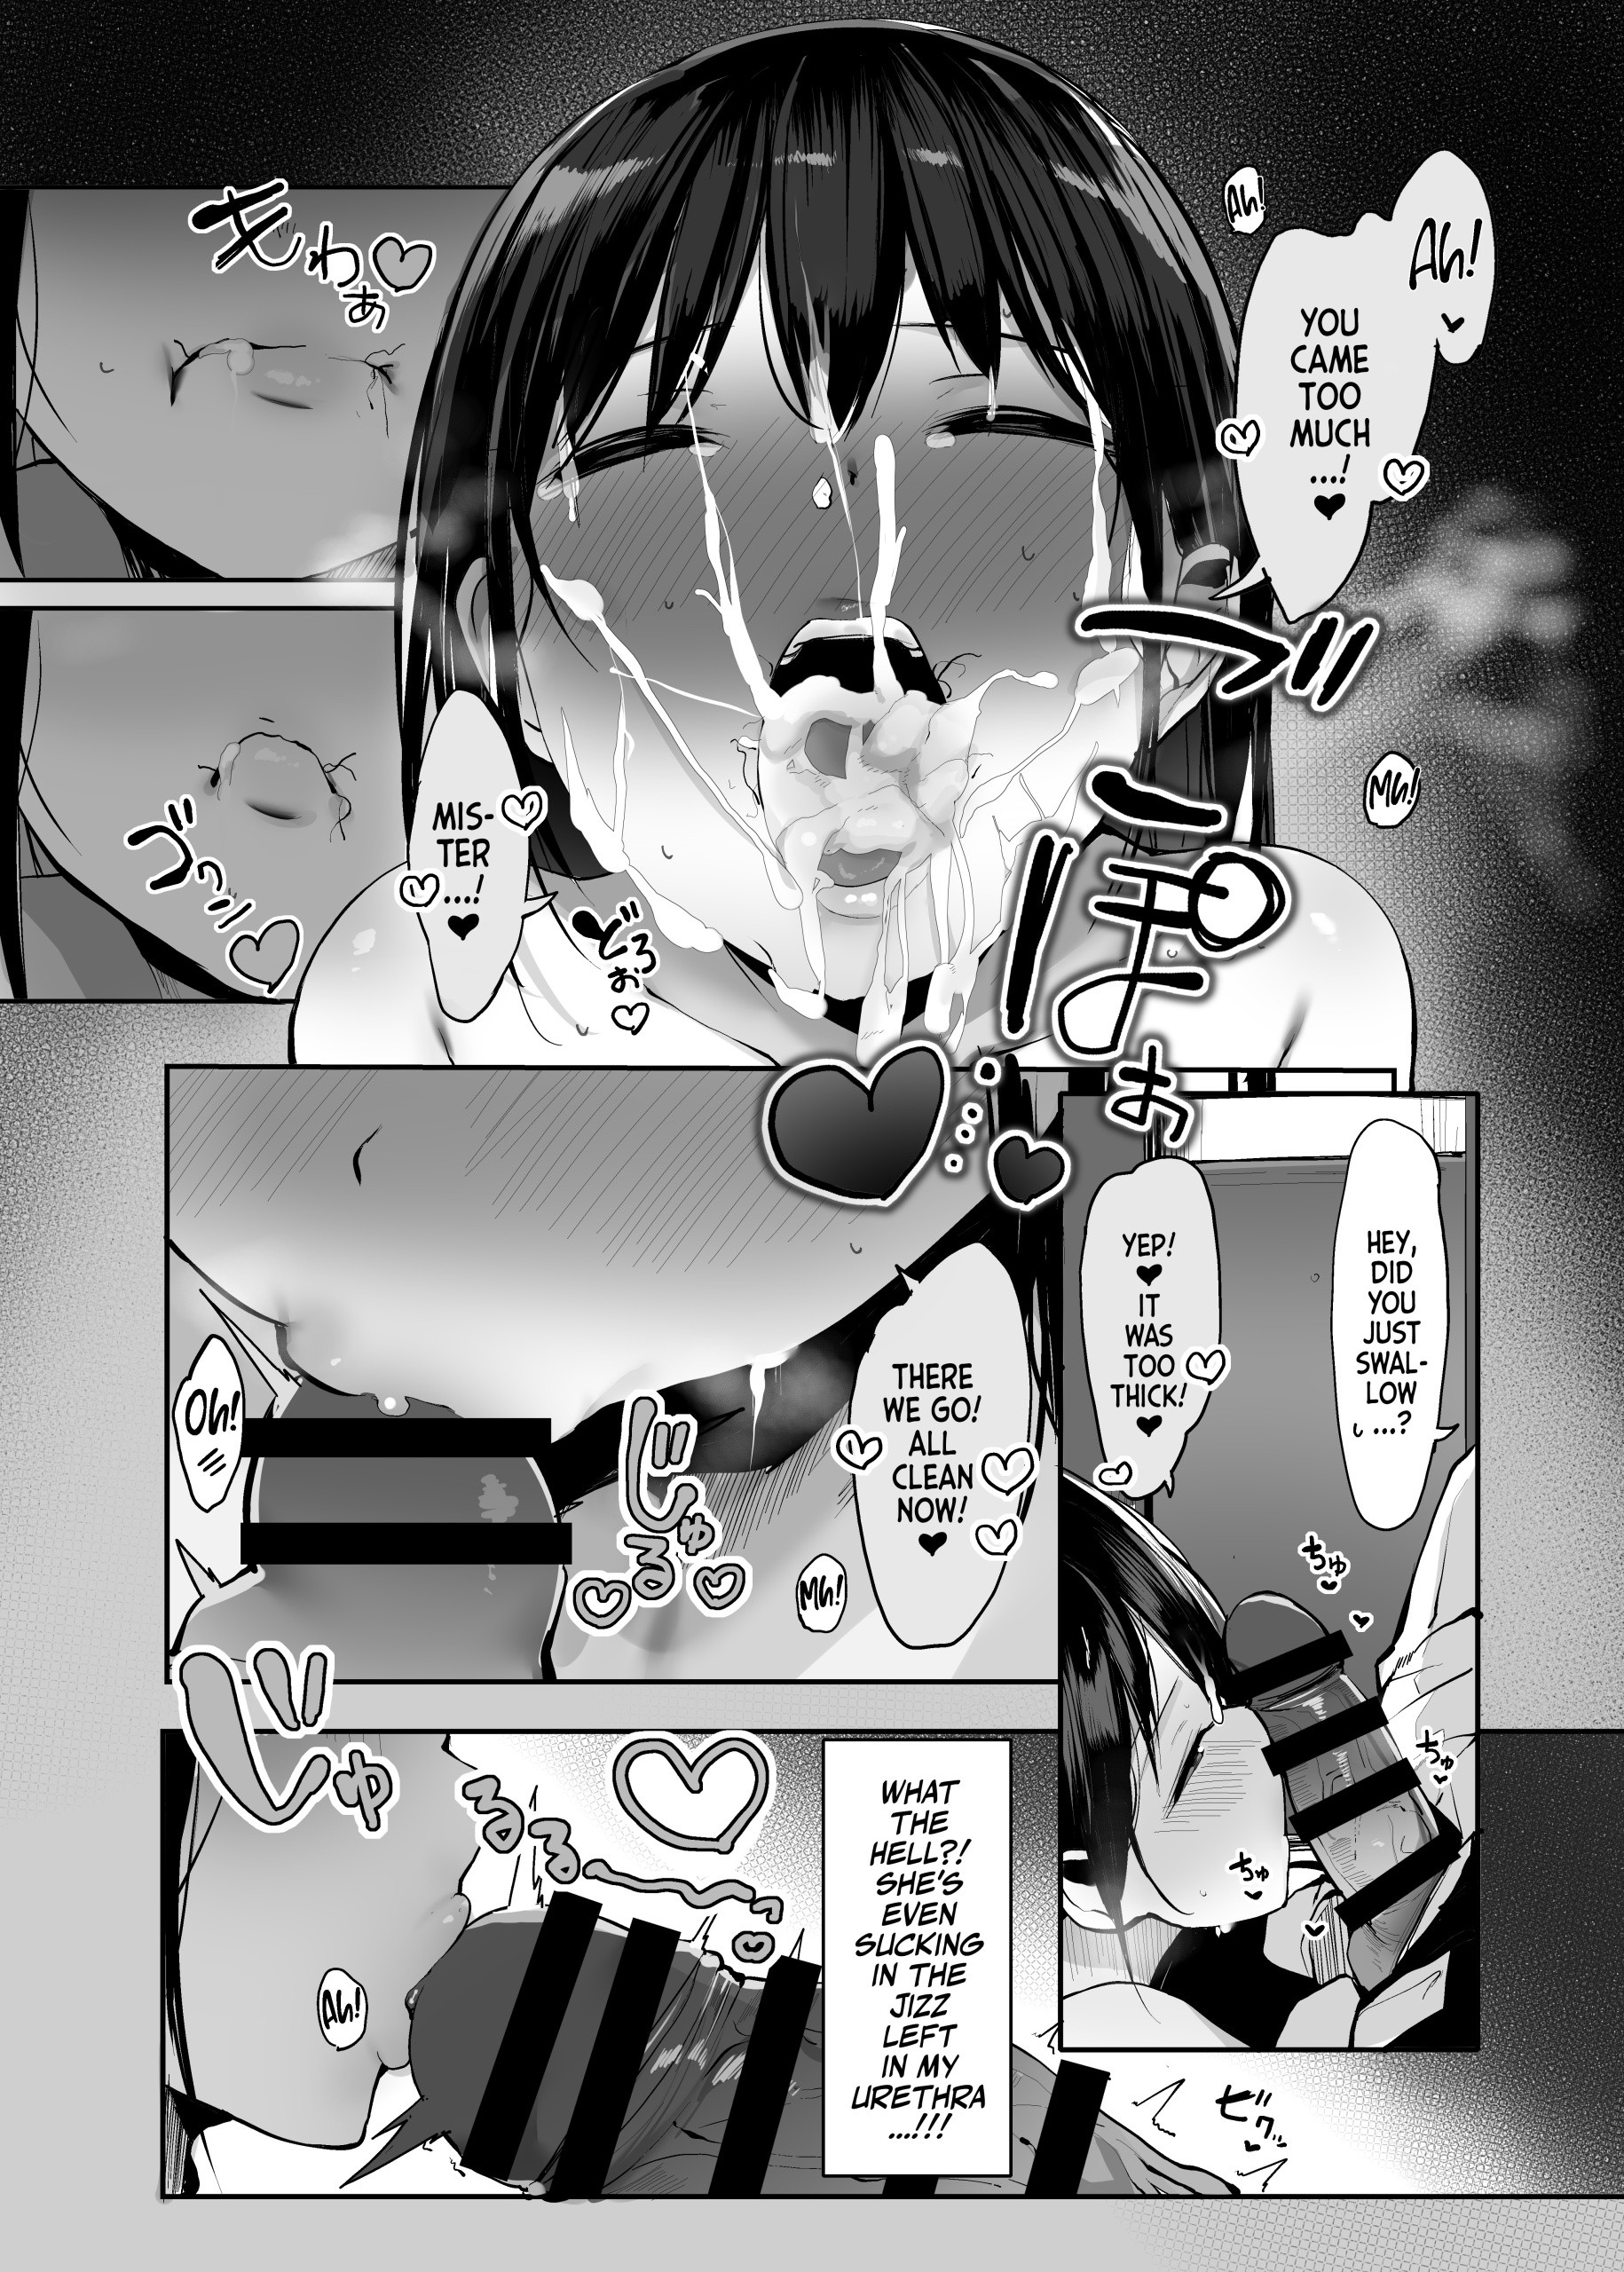 Can I Stay Over, Mister hentai manga picture 10